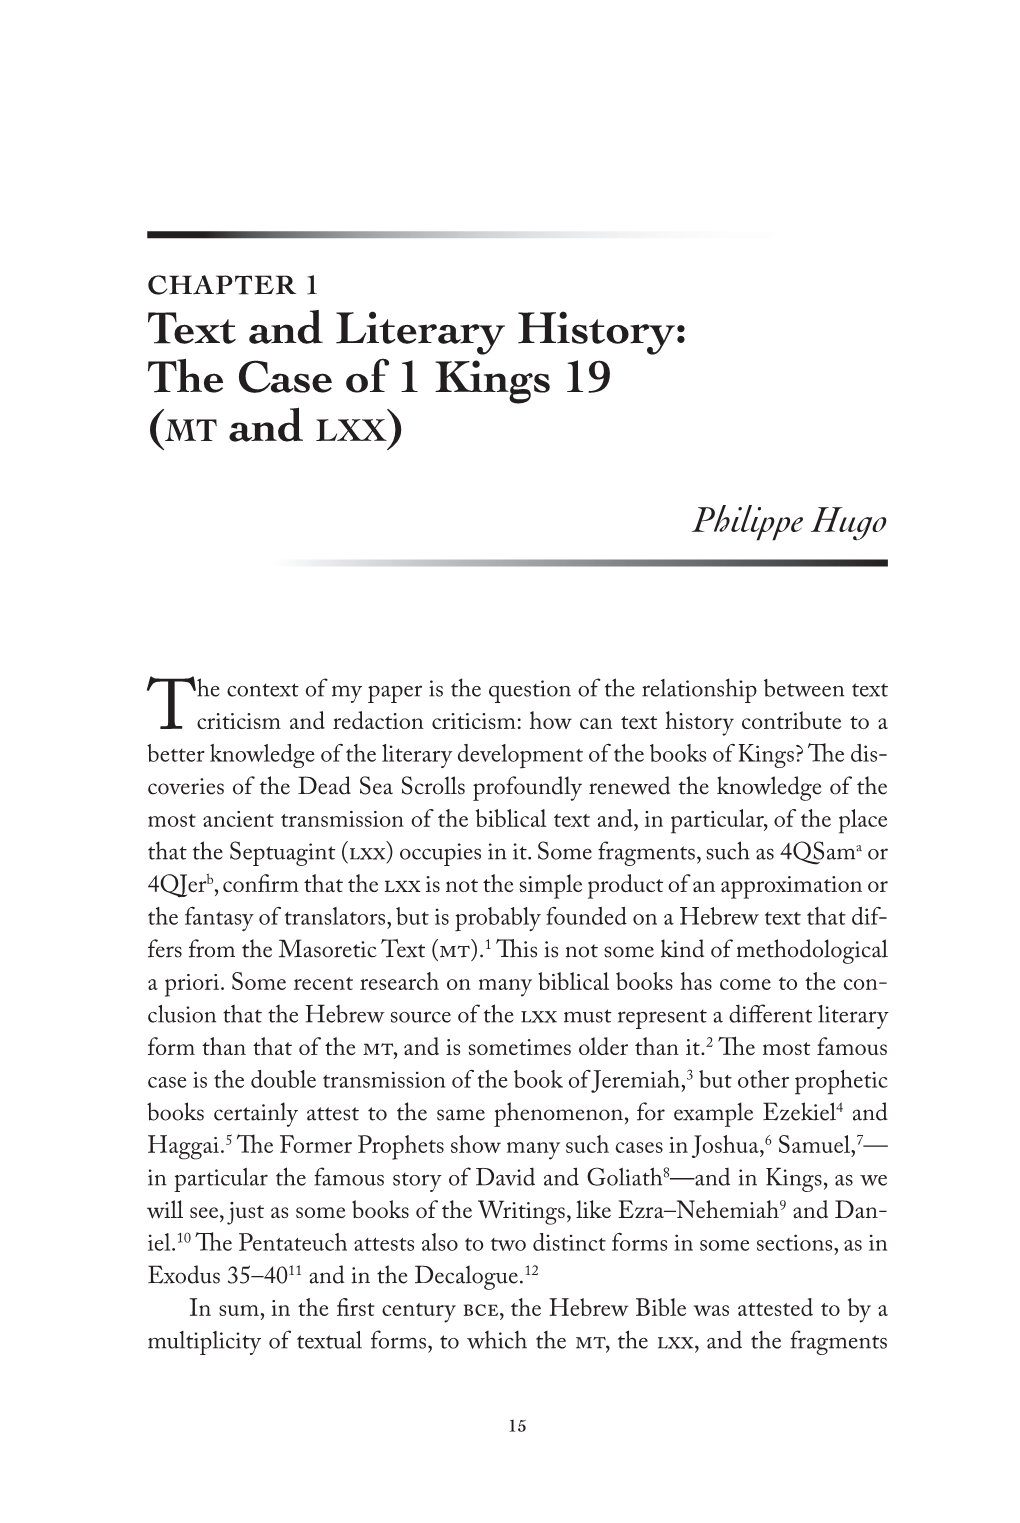 Text and Literary History: the Case of 1 Kings 19 (Mt and Lxx)